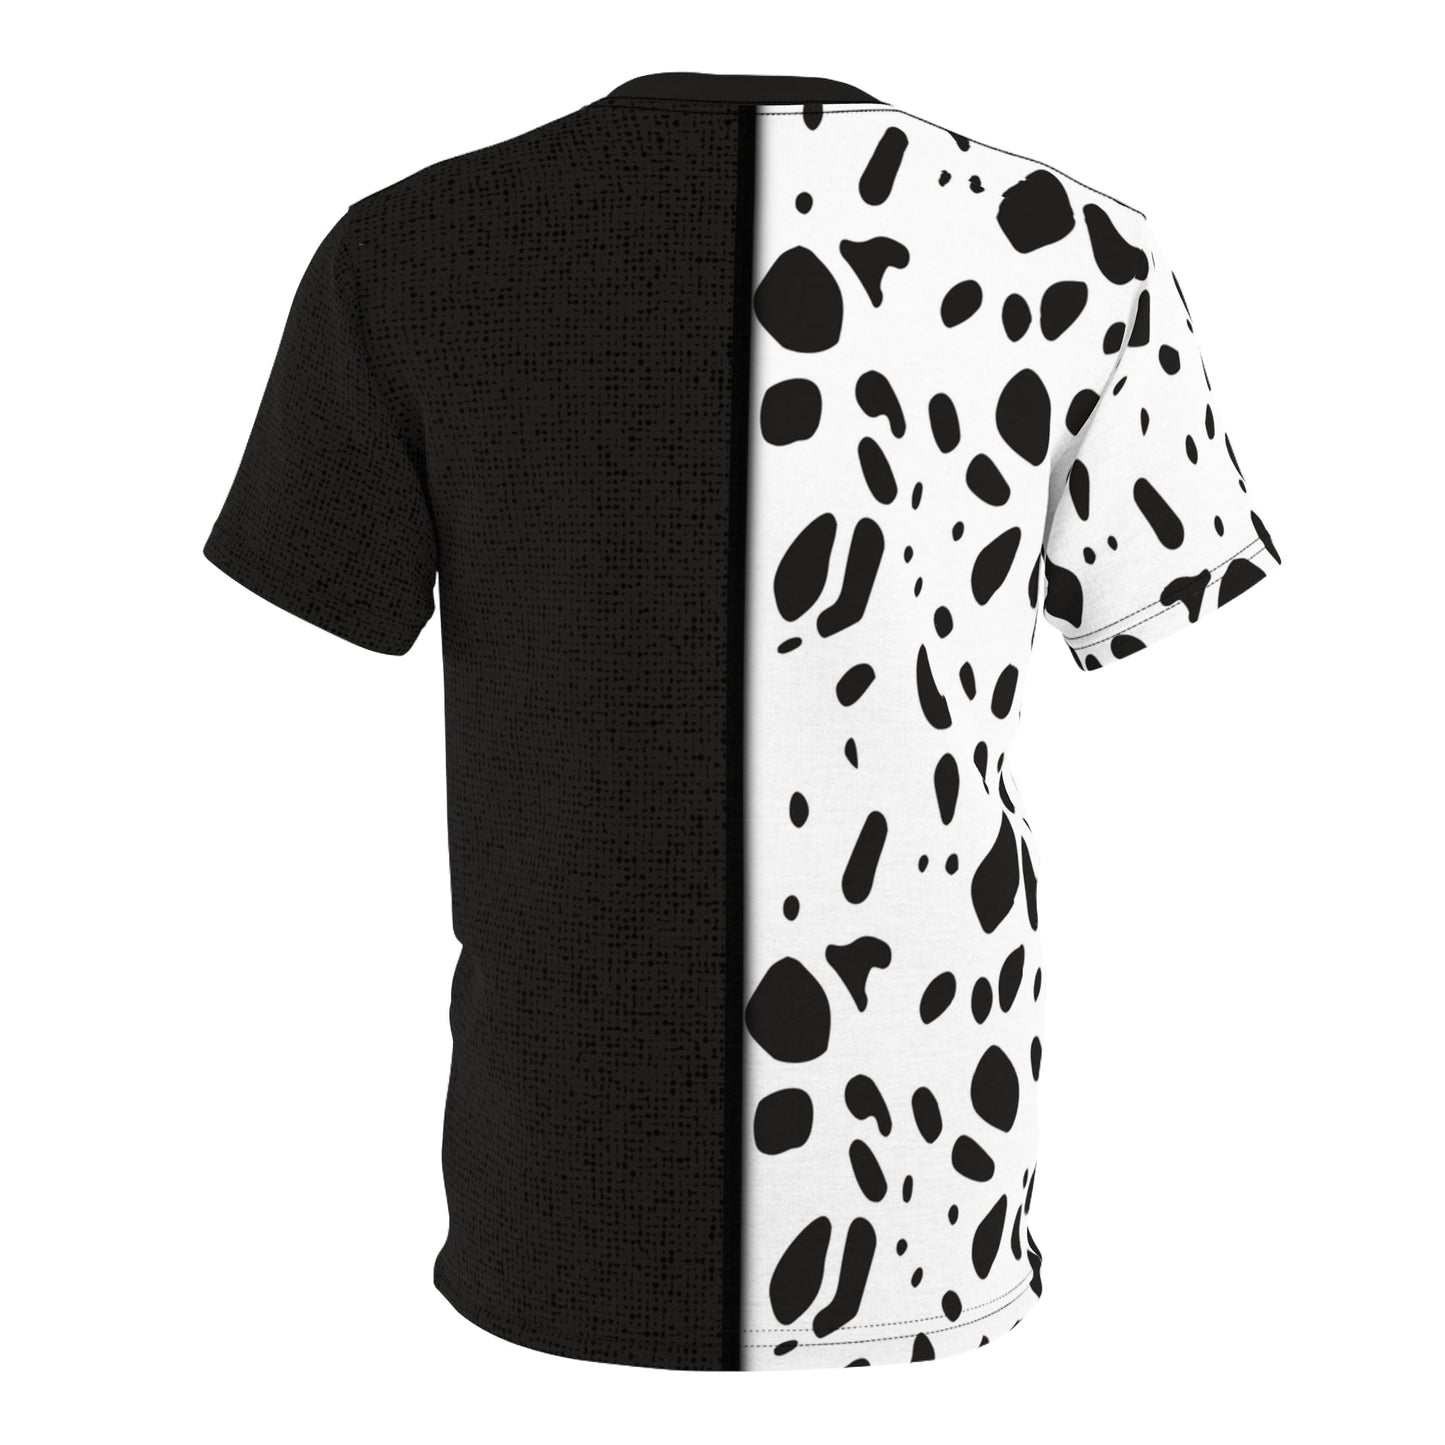 The Cruella Unisex Tee All Over PrintAOP ClothingAssembled in the USA#tag4##tag5##tag6#